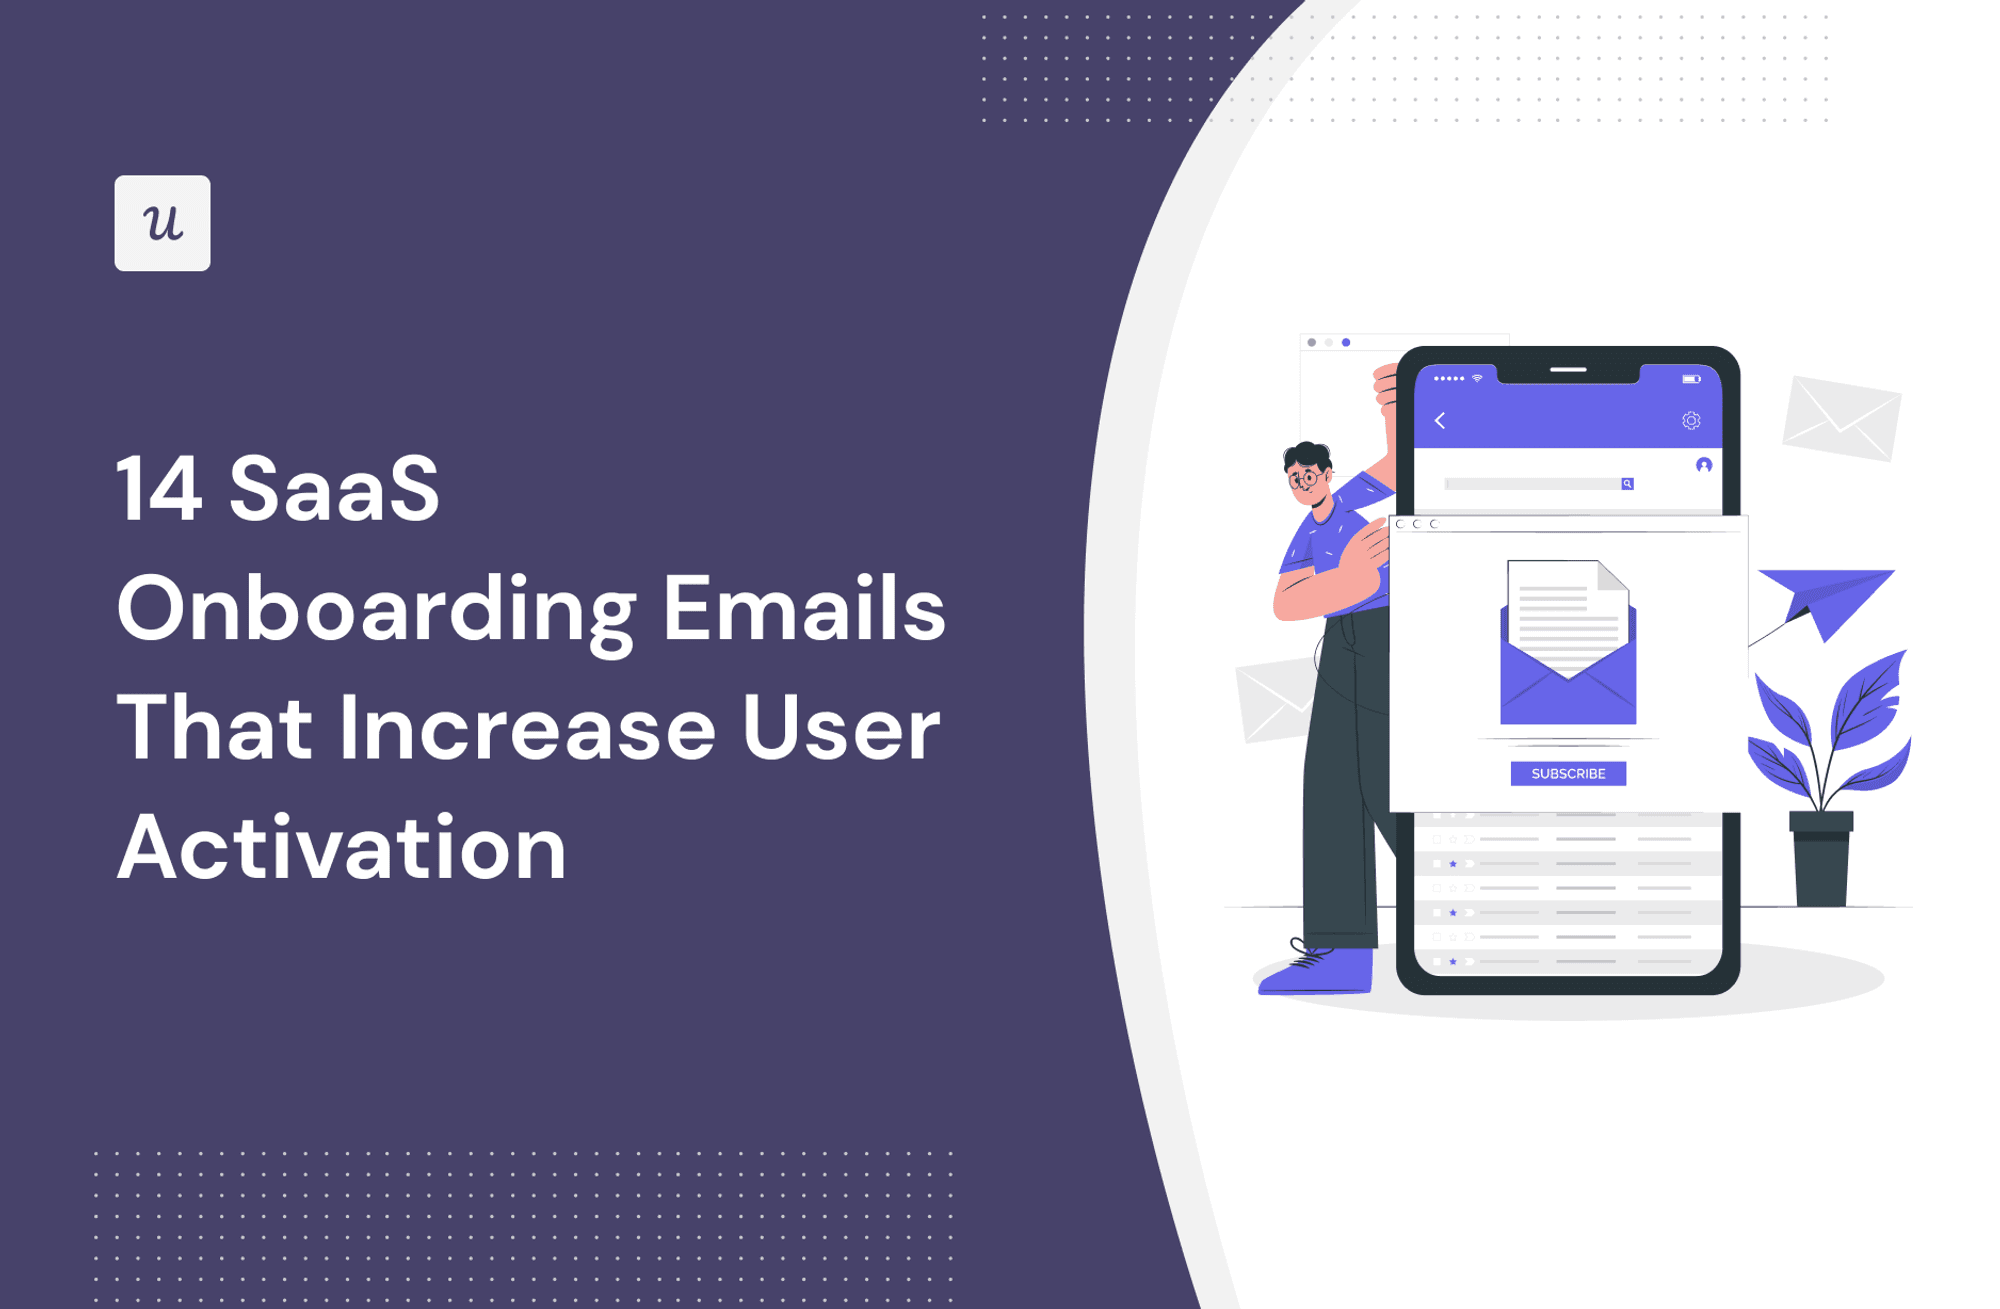 14 SaaS Onboarding Emails That Increase User Activation cover